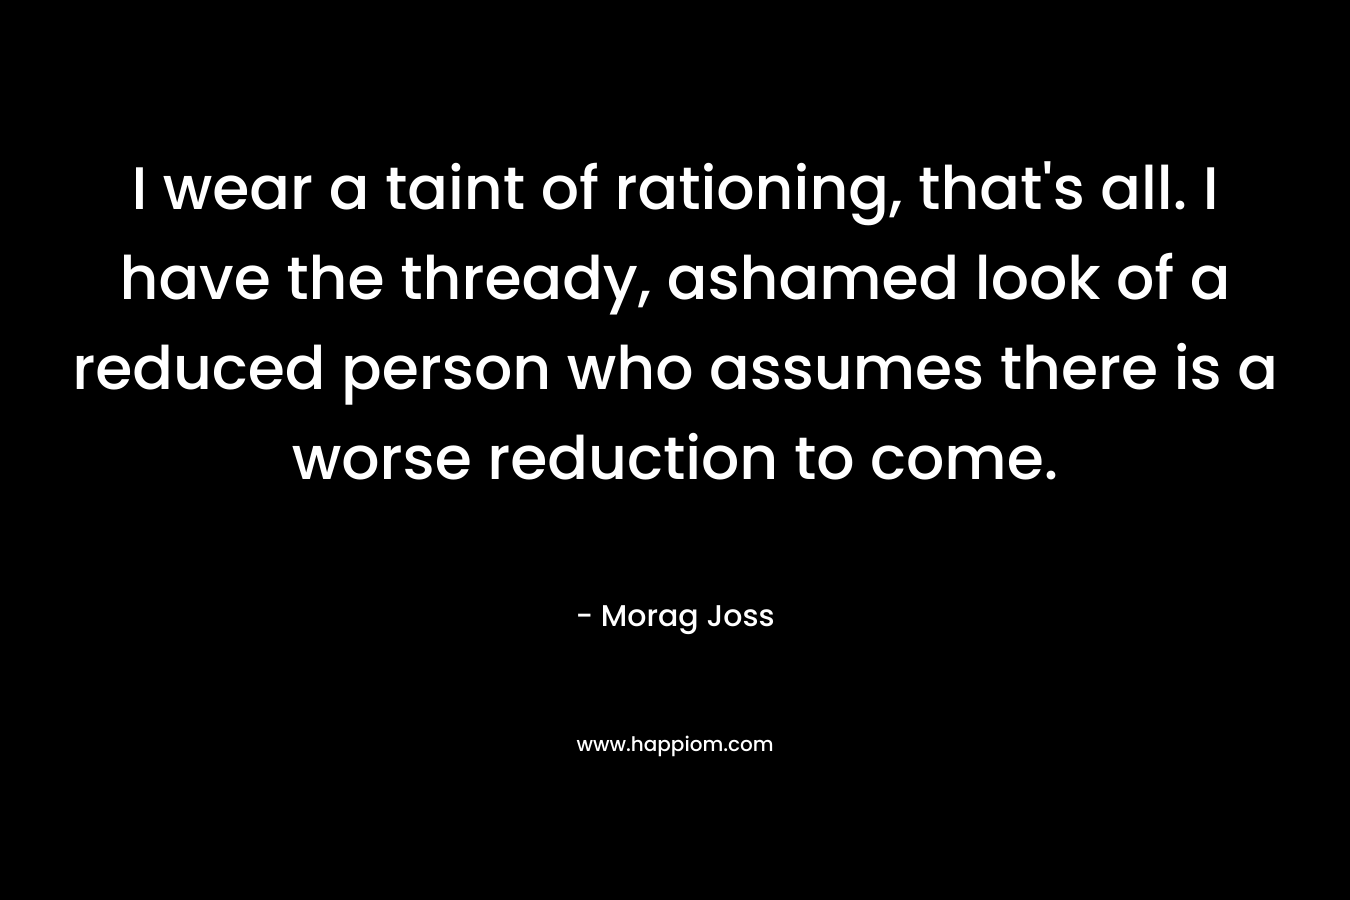 I wear a taint of rationing, that’s all. I have the thready, ashamed look of a reduced person who assumes there is a worse reduction to come. – Morag Joss